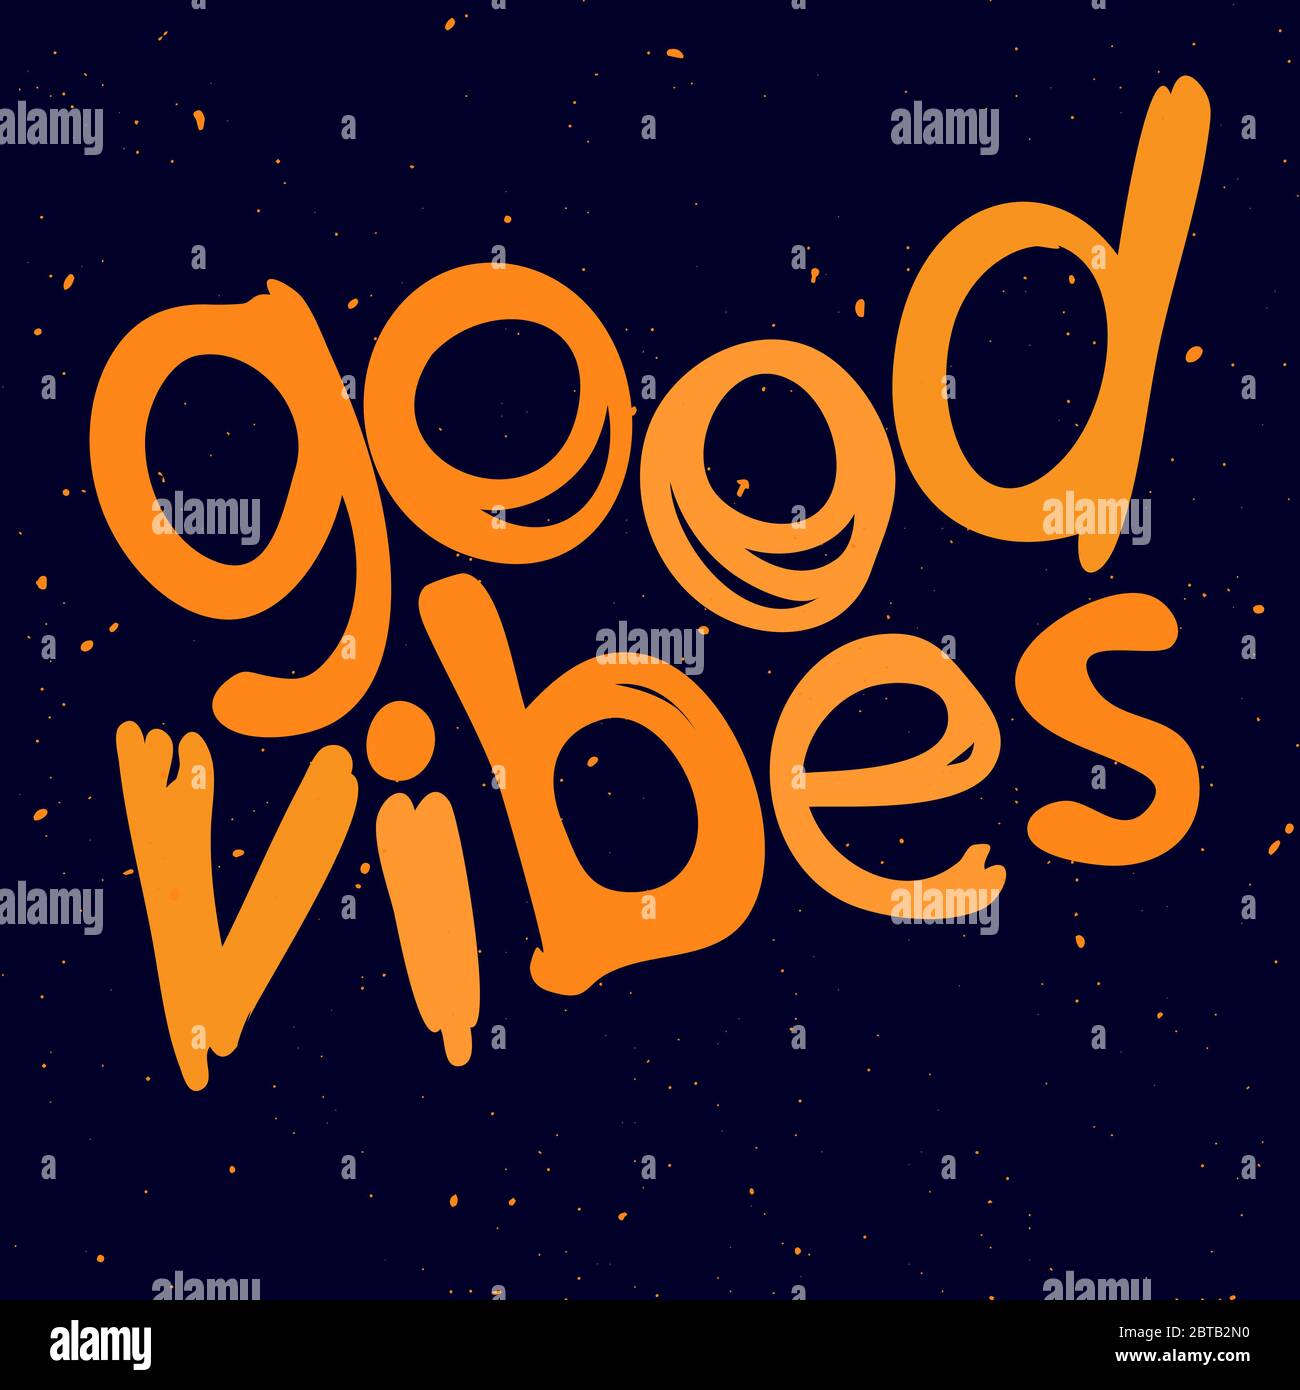 Good Vibes - orange doodle isolate lettering inscription and drops or blotches. Сurved doodle letters on dark background. Motivating inspiring. Stock Vector